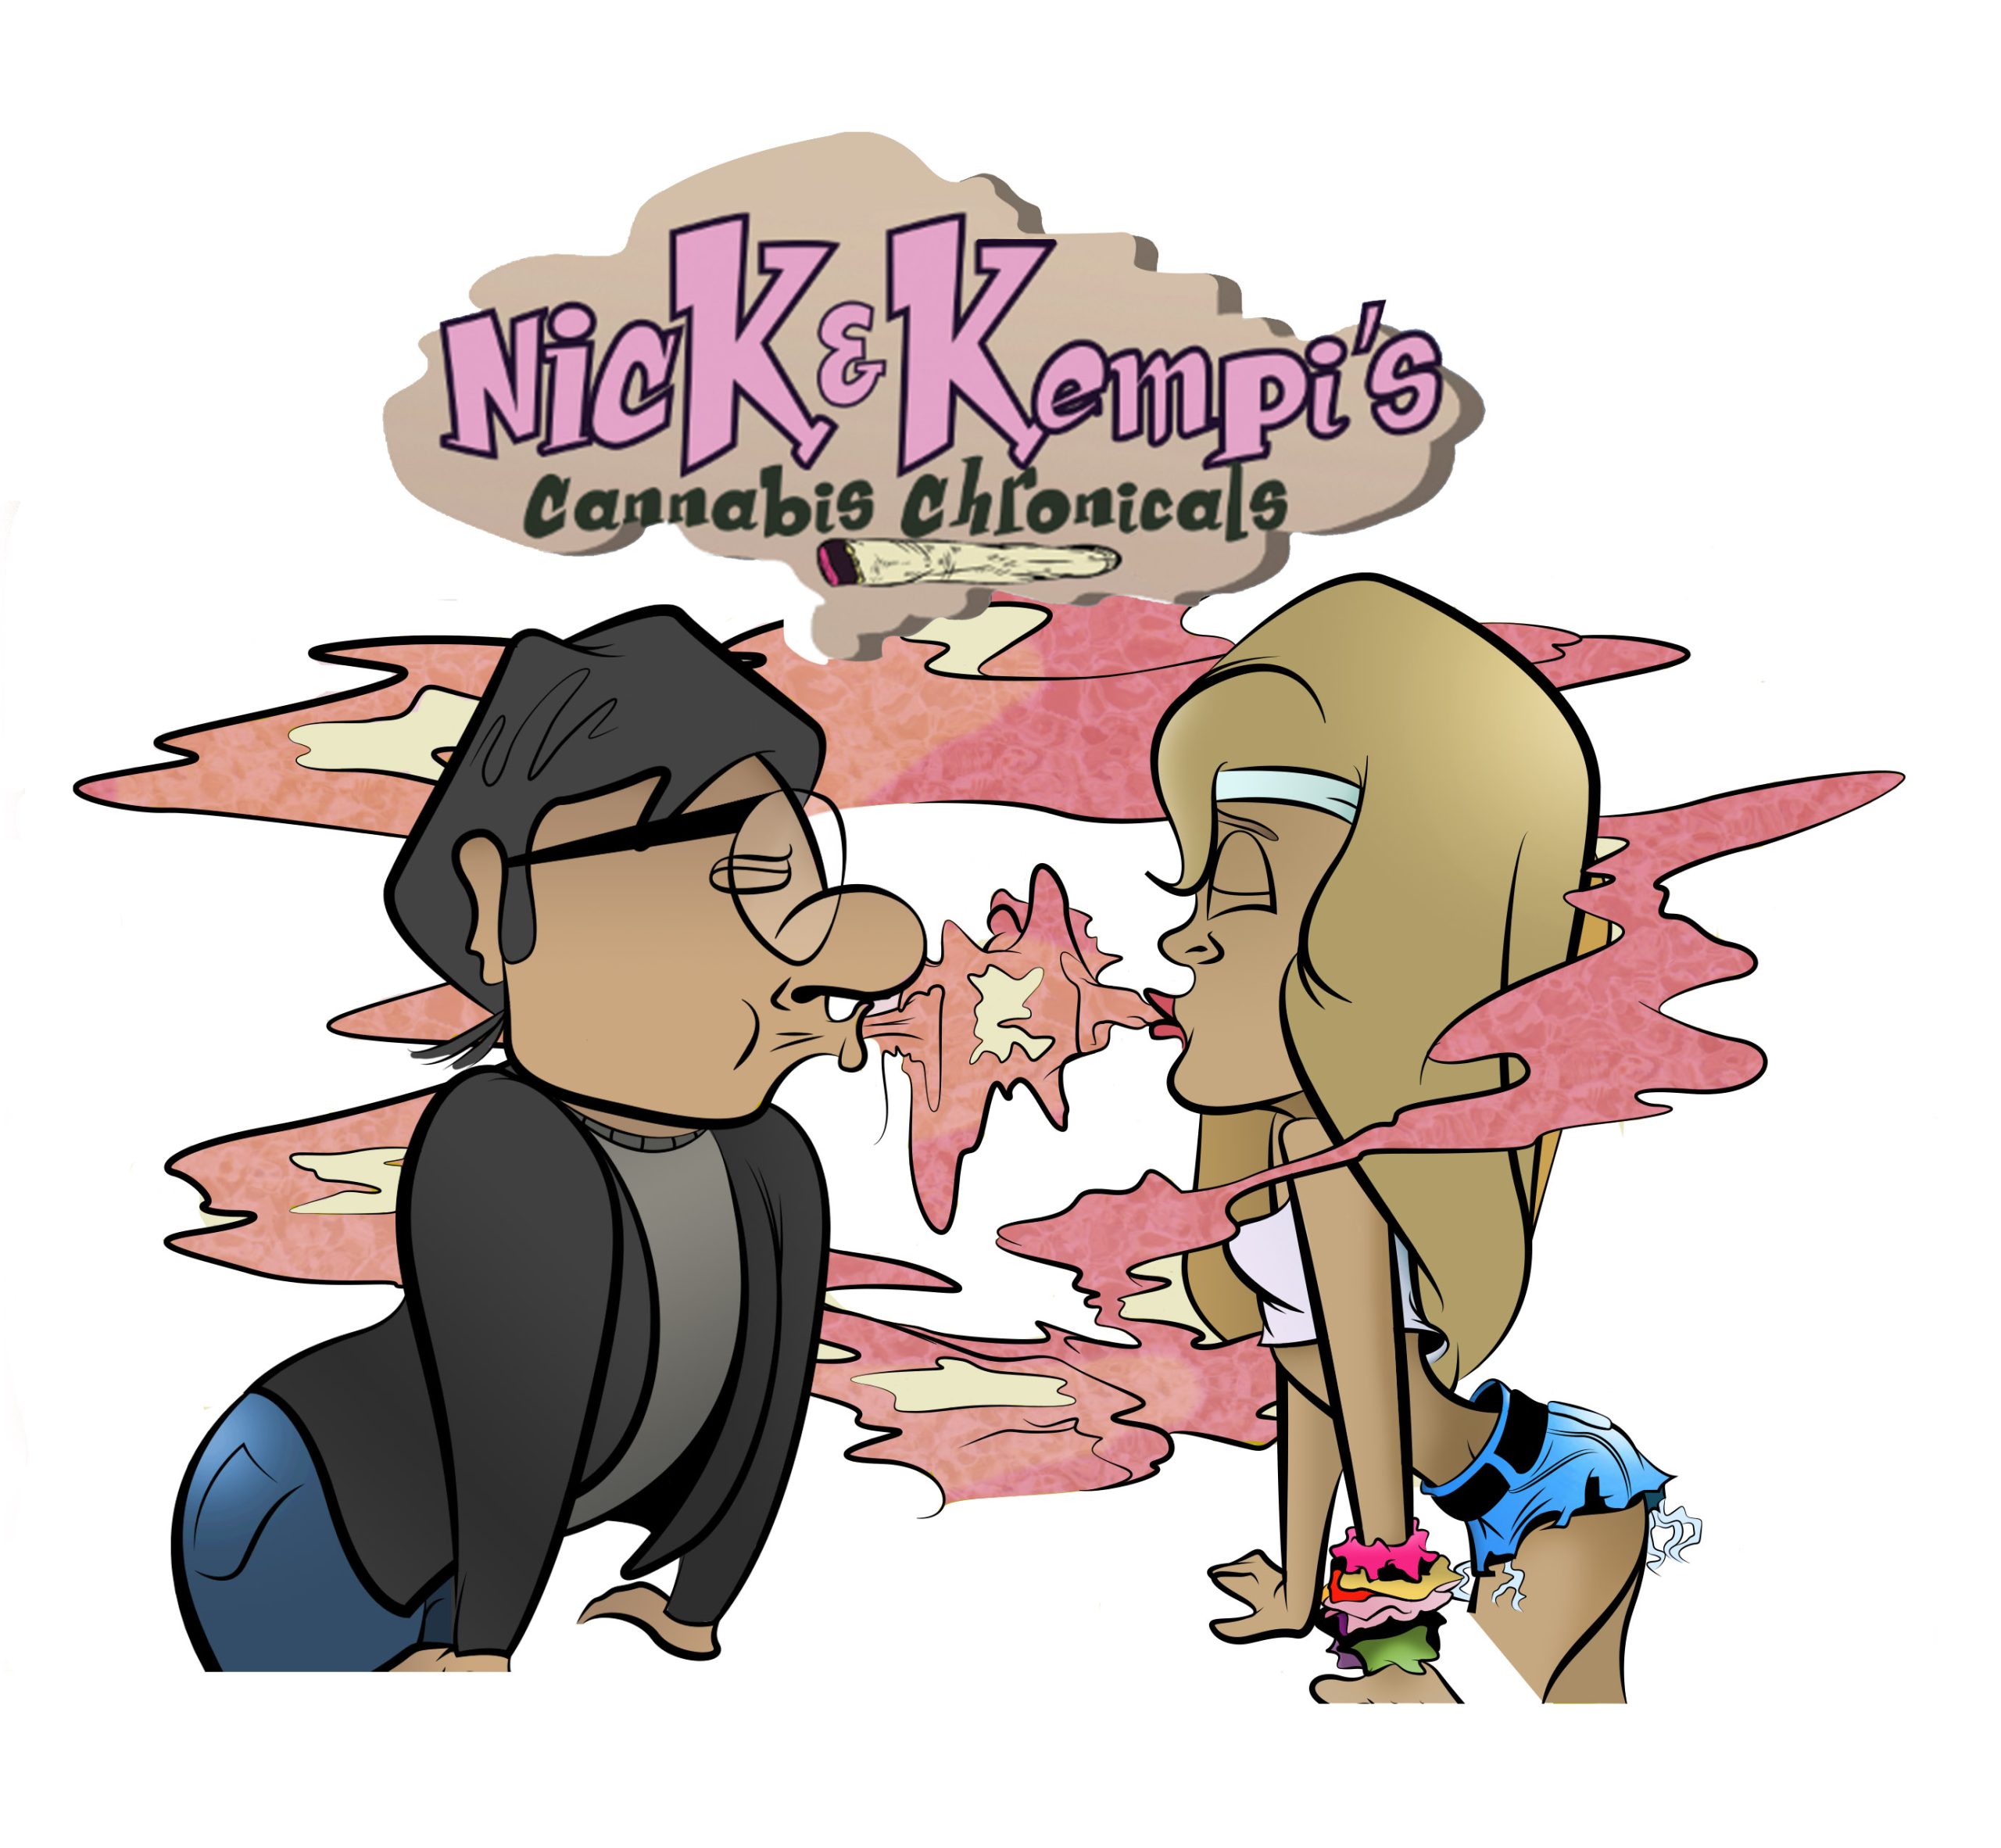 Header Image for Nick and Kempi's section of the site